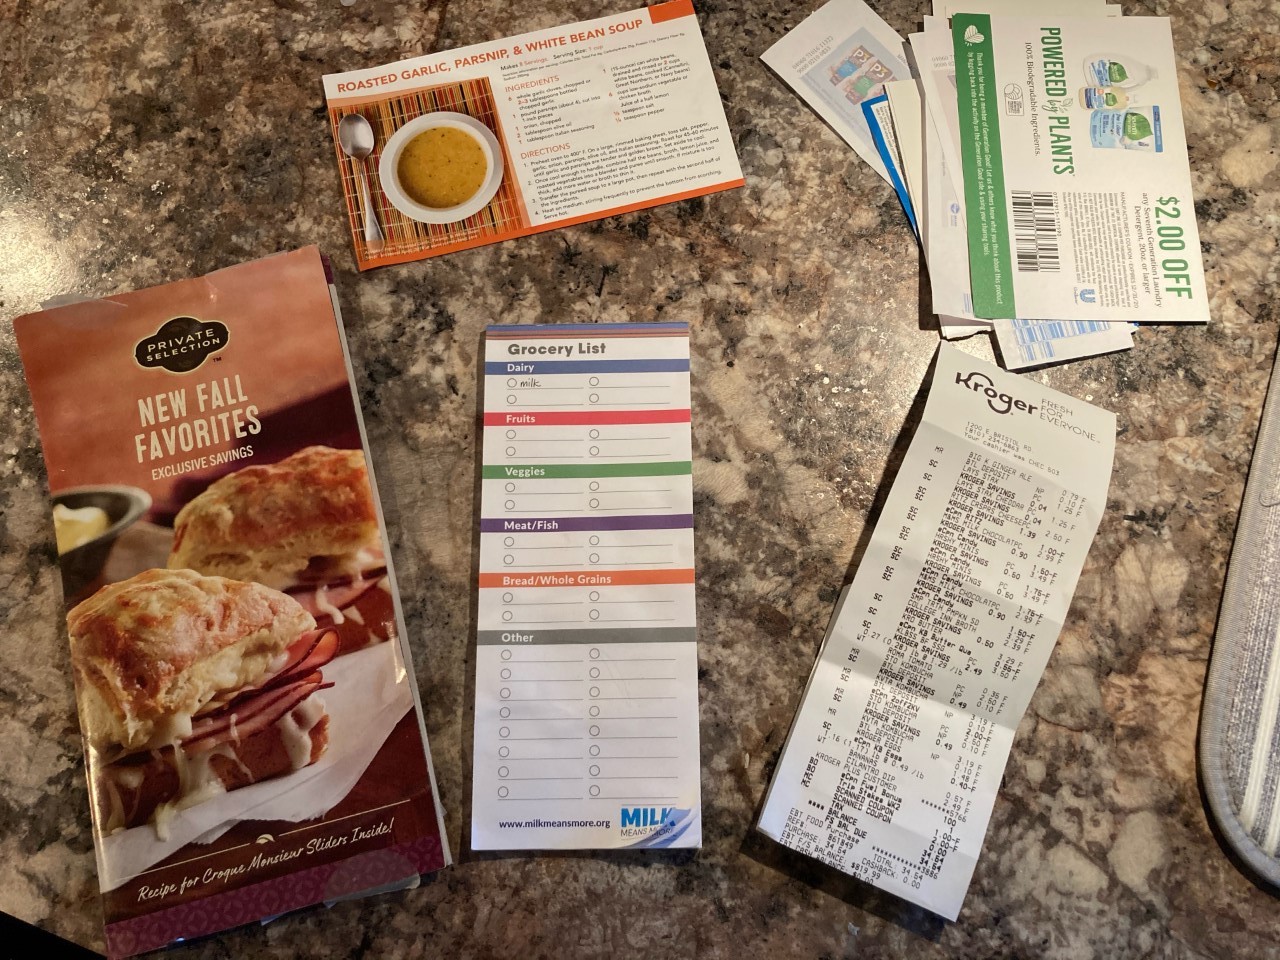 Boxed food, receipts, and coupons.